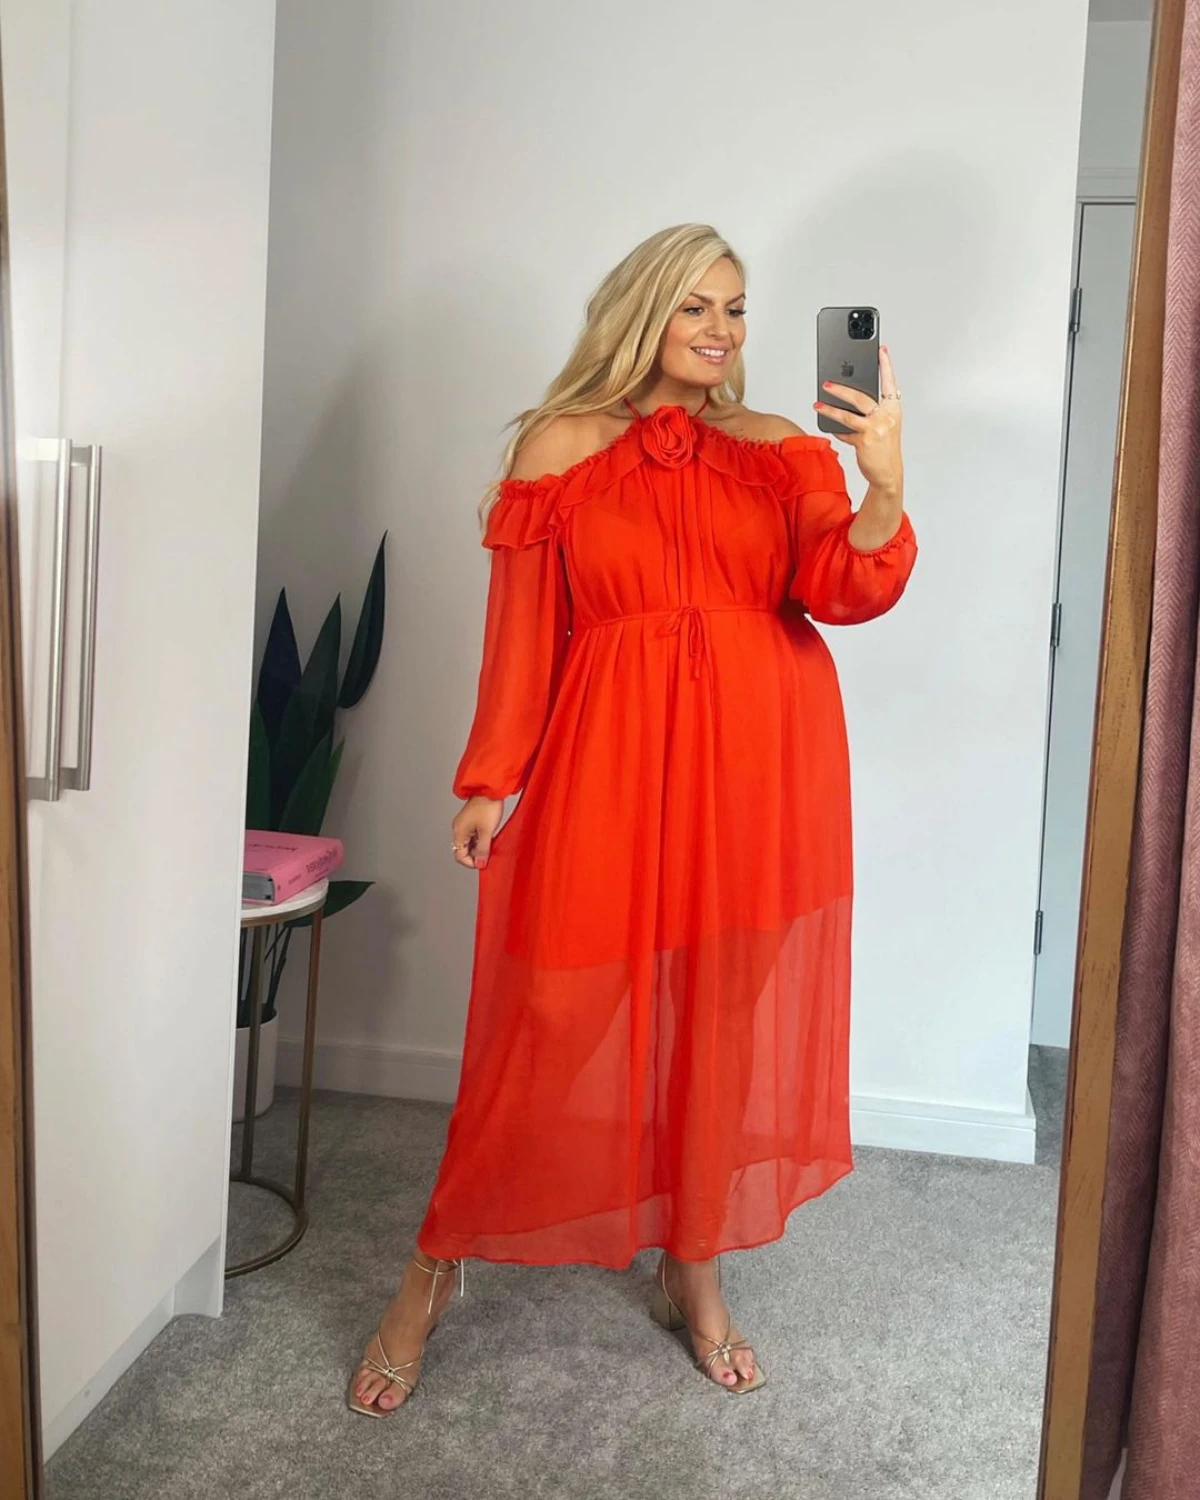 robe rouge longue trasnparente femme ronde look